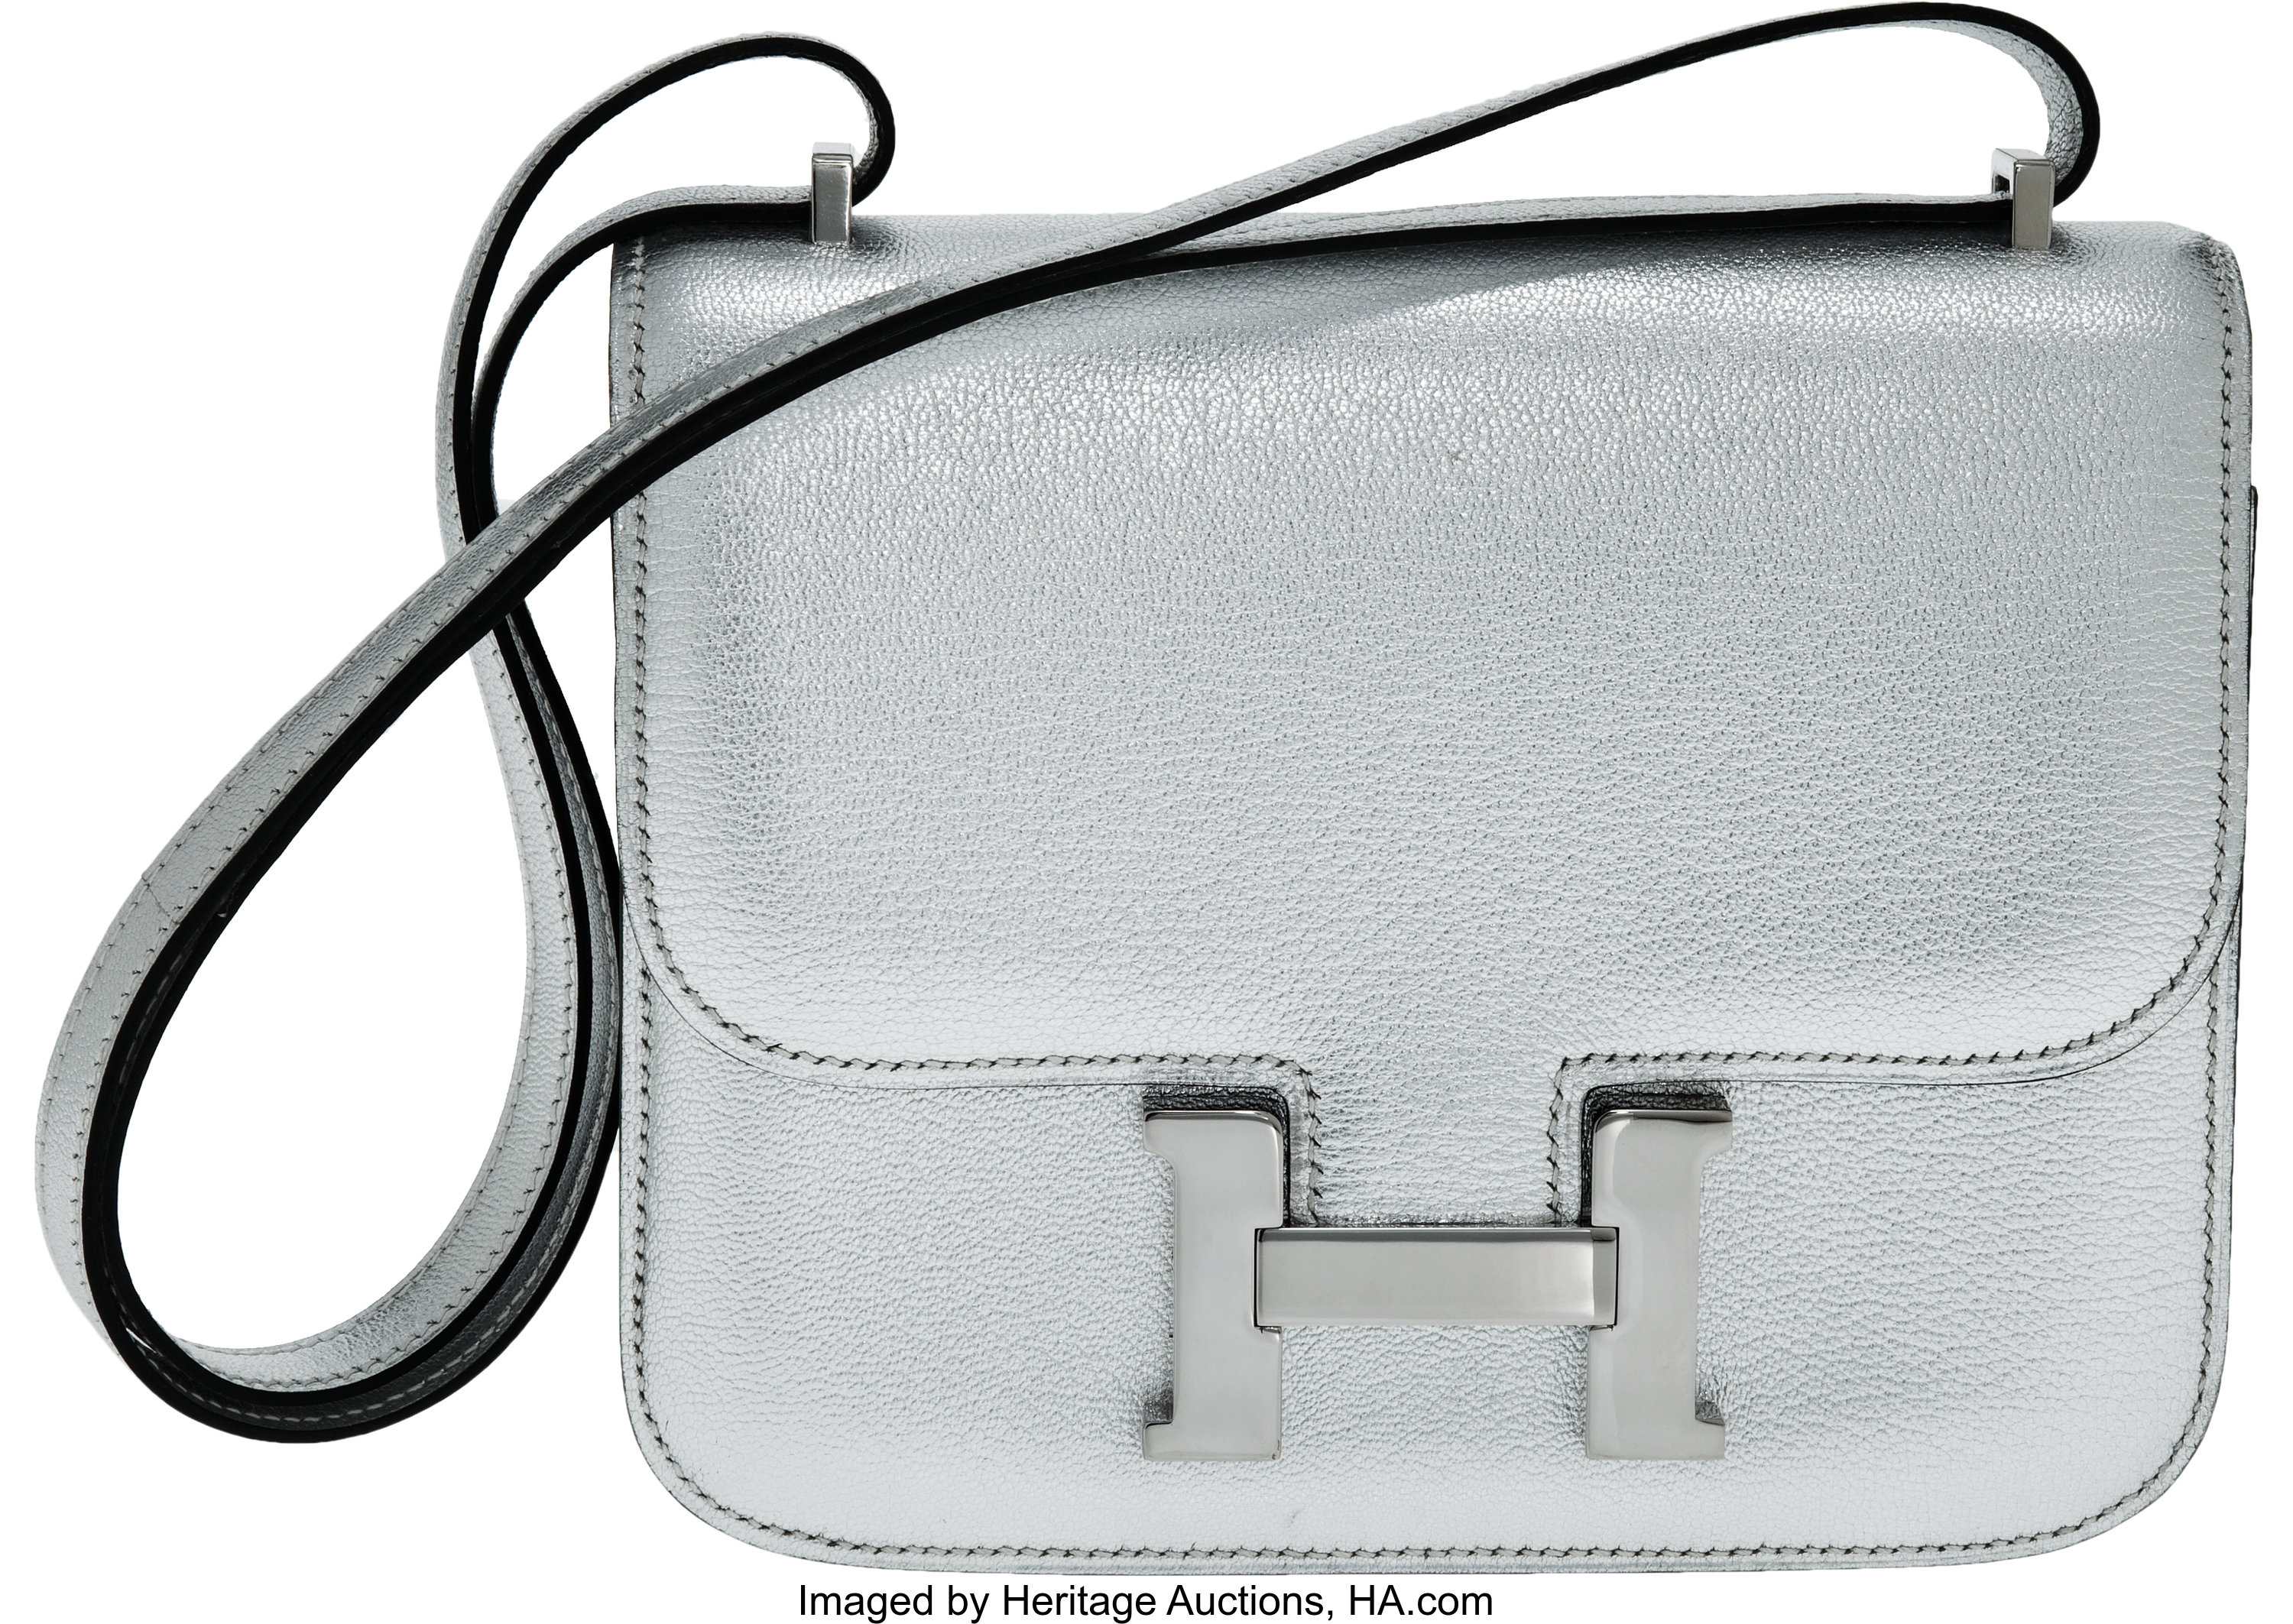 Hermes 25cm Limited Edition Metallic Silver Chevre Leather Sellier, Lot  #58133